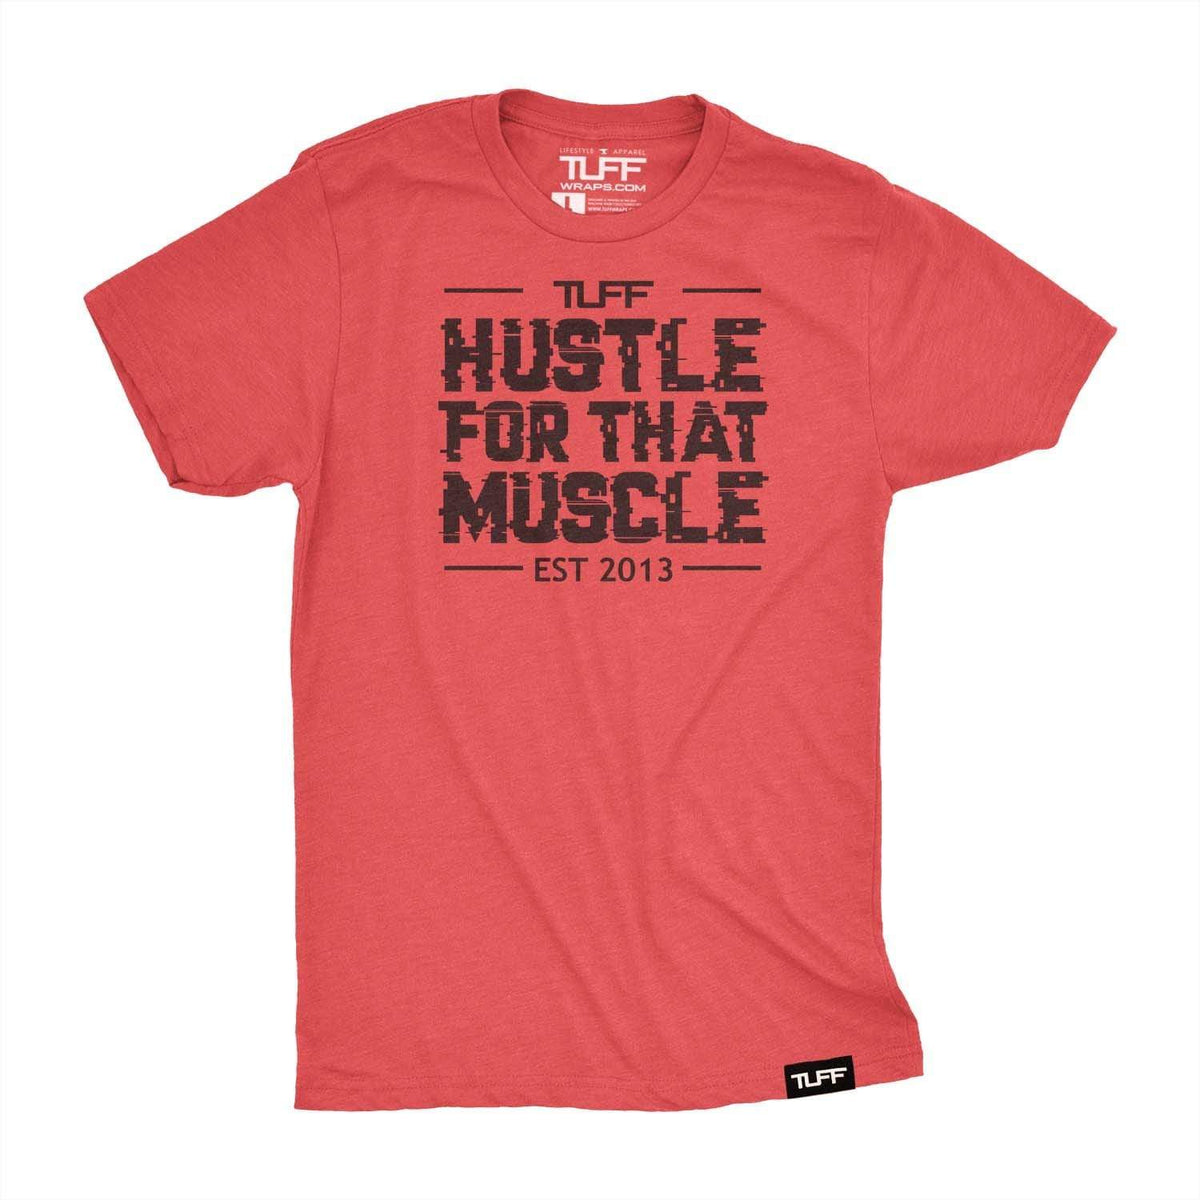 Hustle For That Muscle Tee S / Vintage Red TuffWraps.com